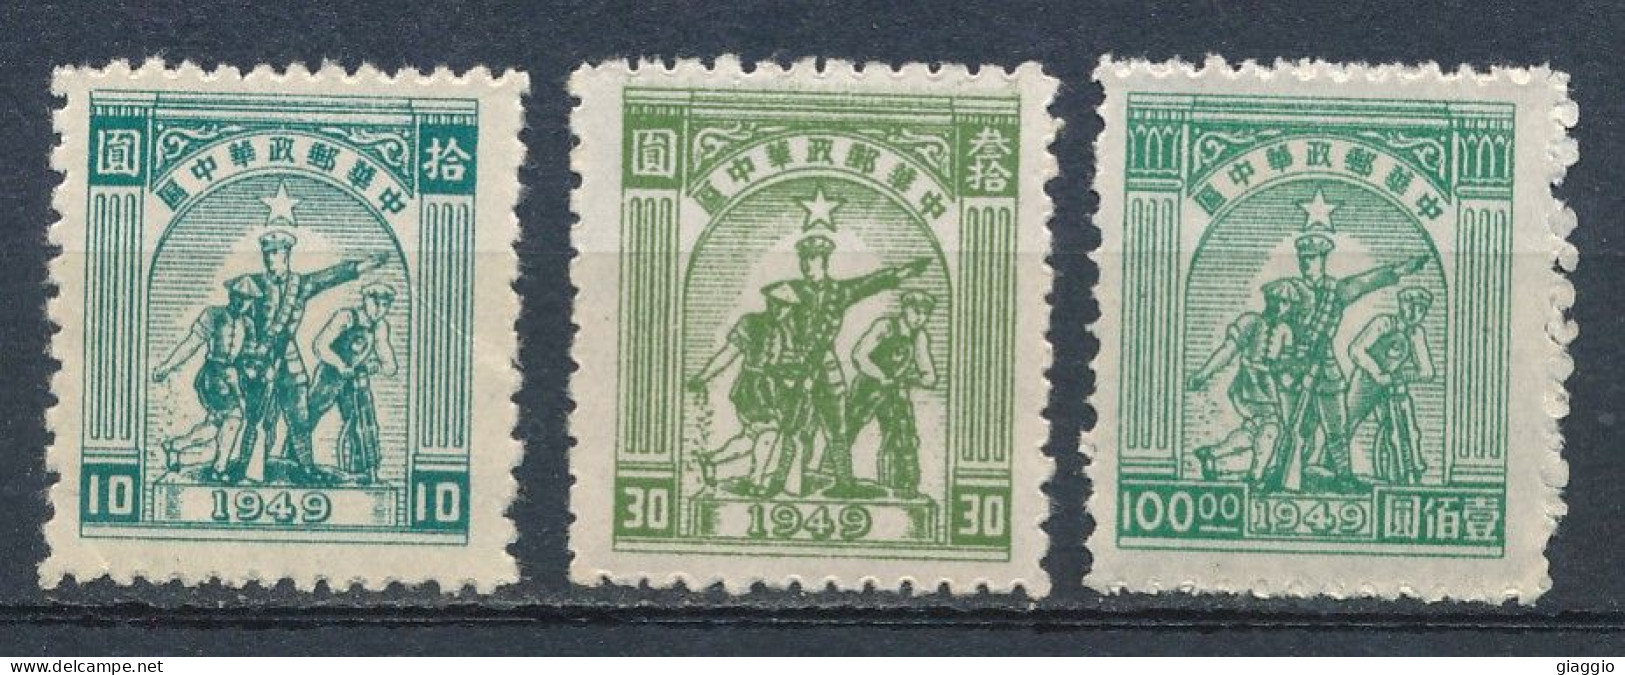 °°° LOT CINA CHINA CENTRALE - Y&T N°65/67/74 - 1949 °°° - Cina Centrale 1948-49